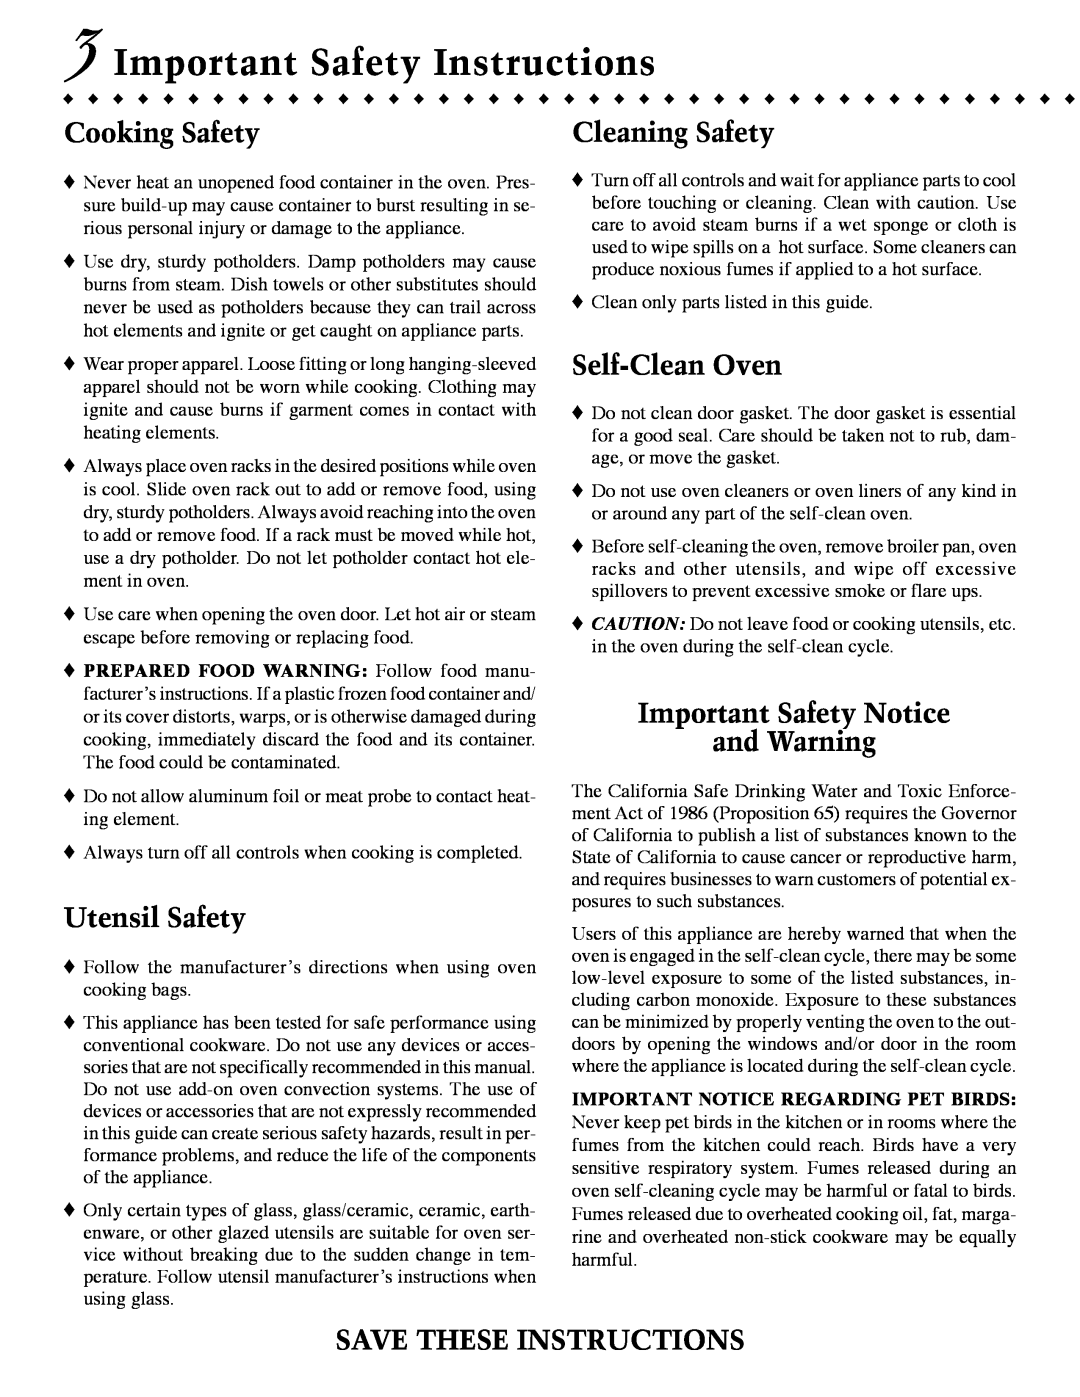 Jenn-Air JJW9530, JJW9527 3Important Safety Instructions, Cooking Safety, Utensil Safety, Cleaning Safety, Self-CleanOven 